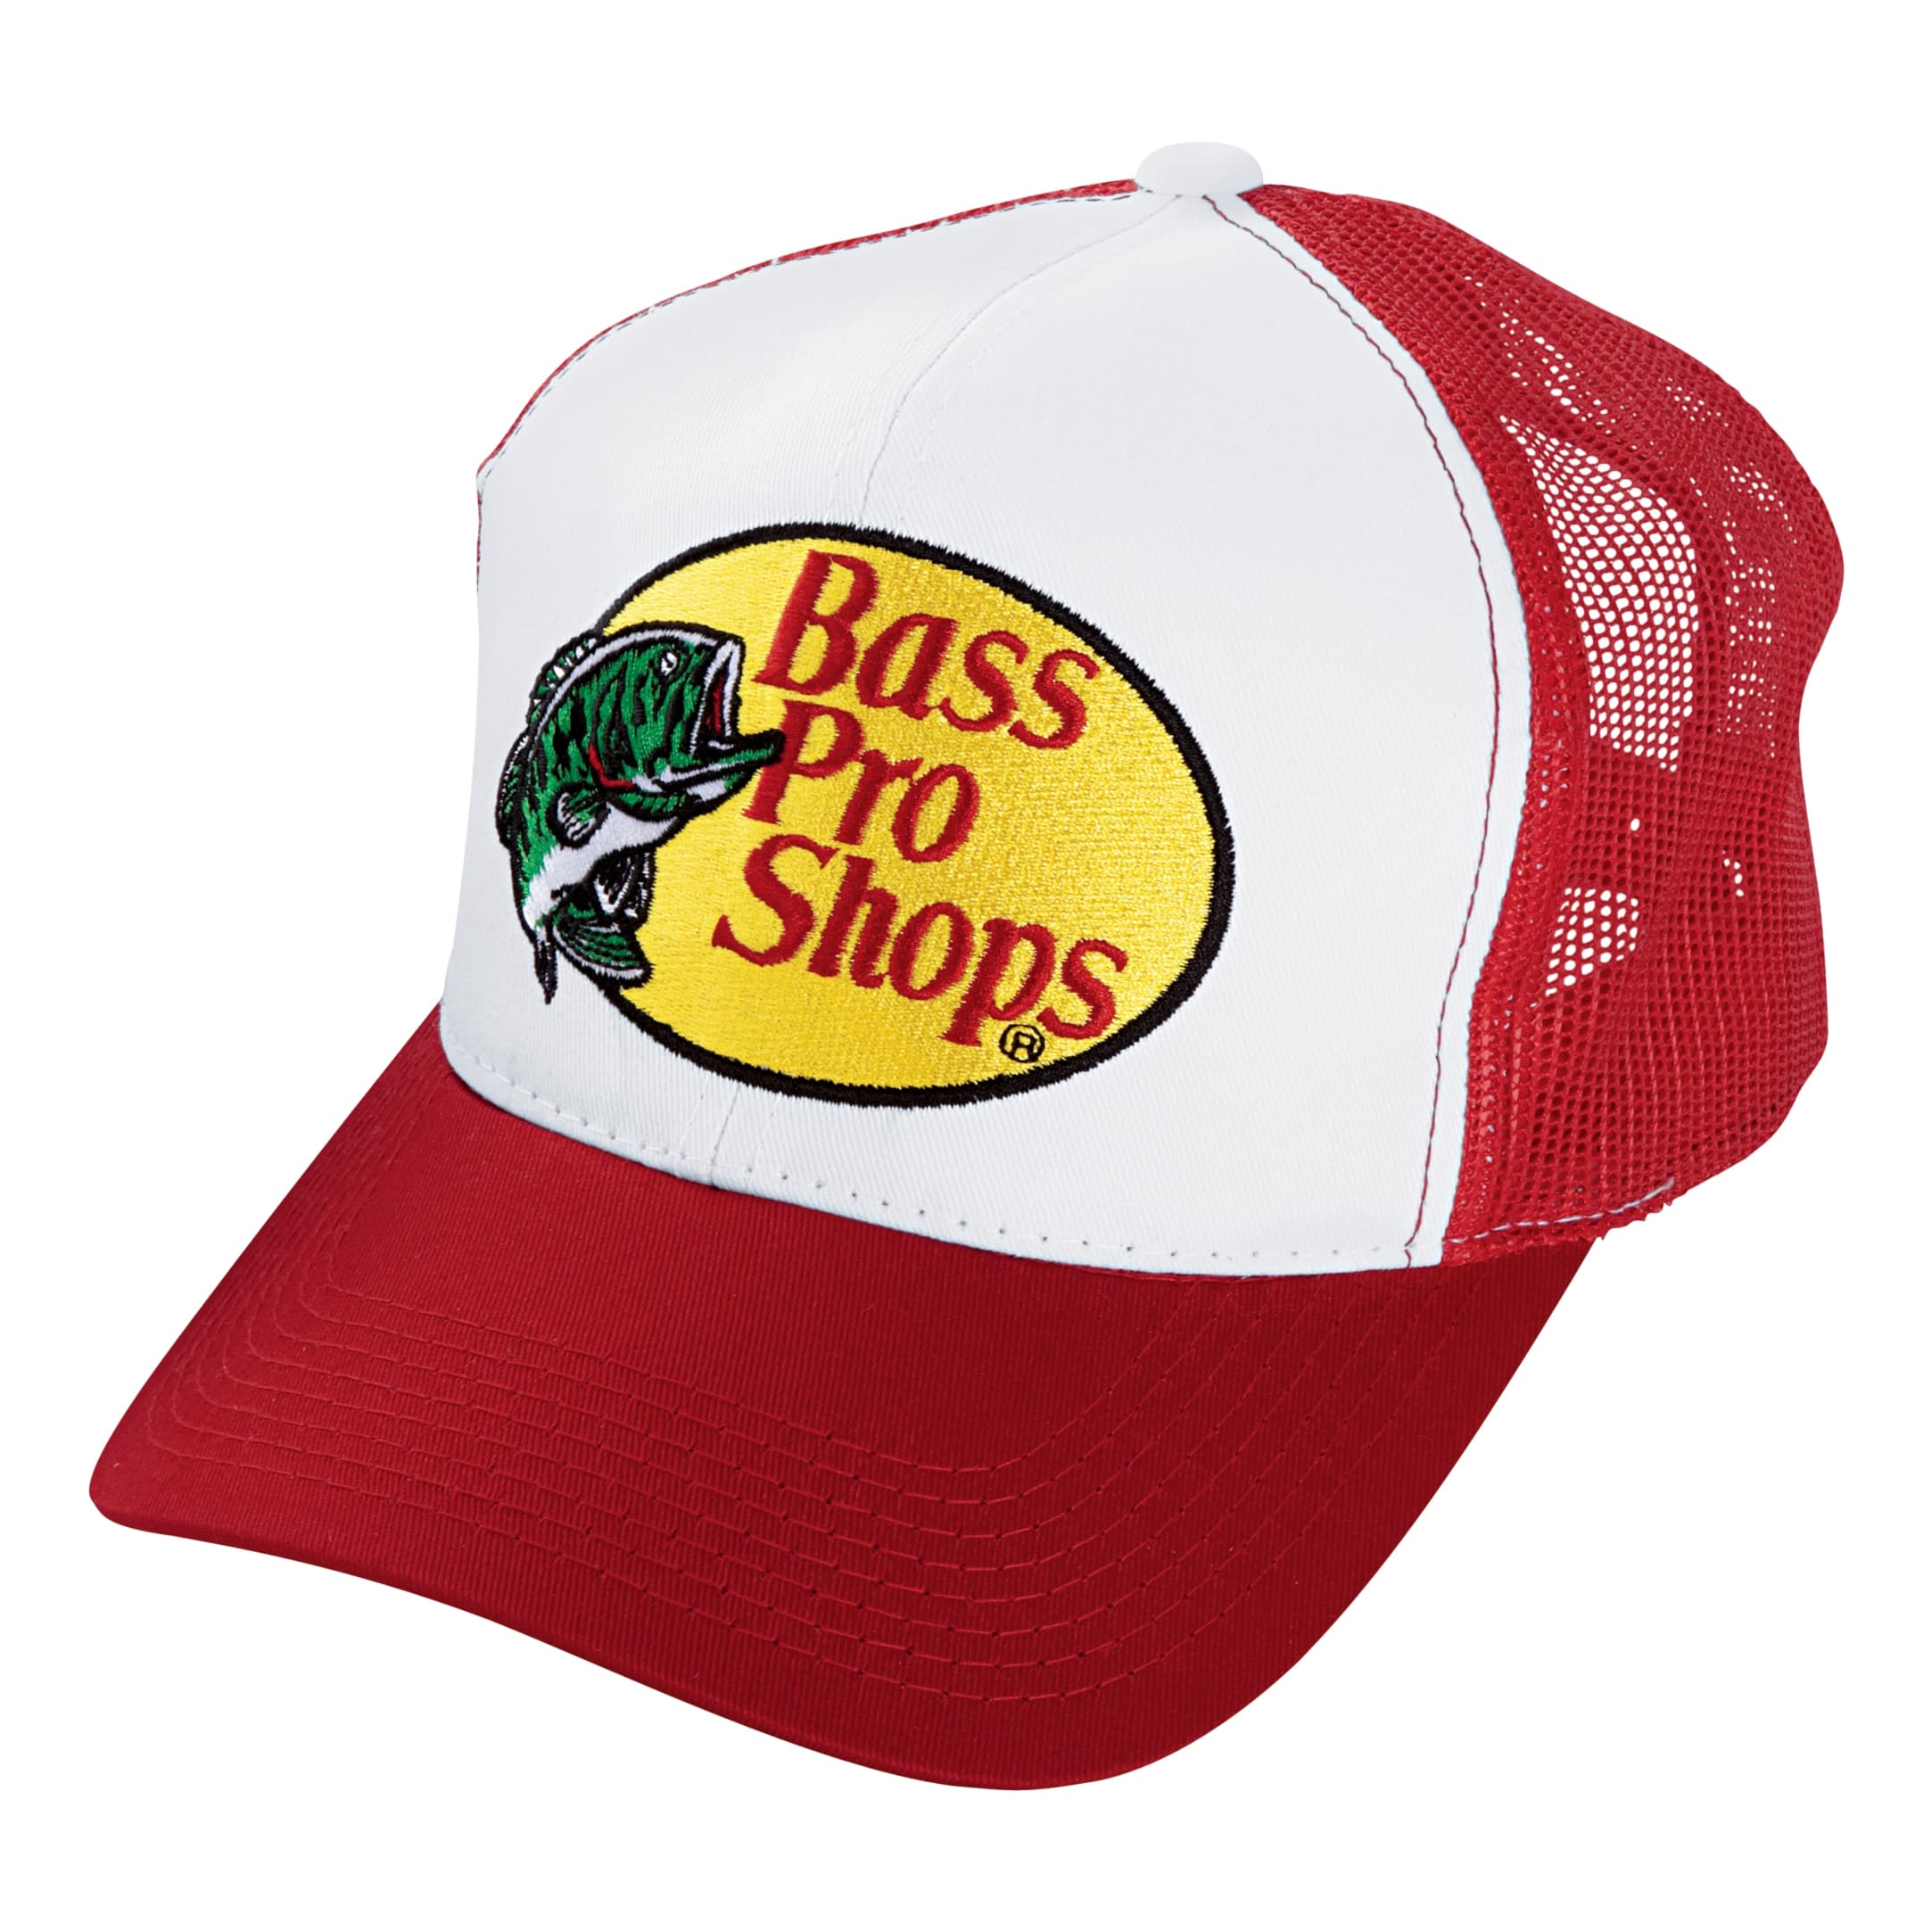 Bass Pro Shops® Embroidered Logo Mesh Caps - Red